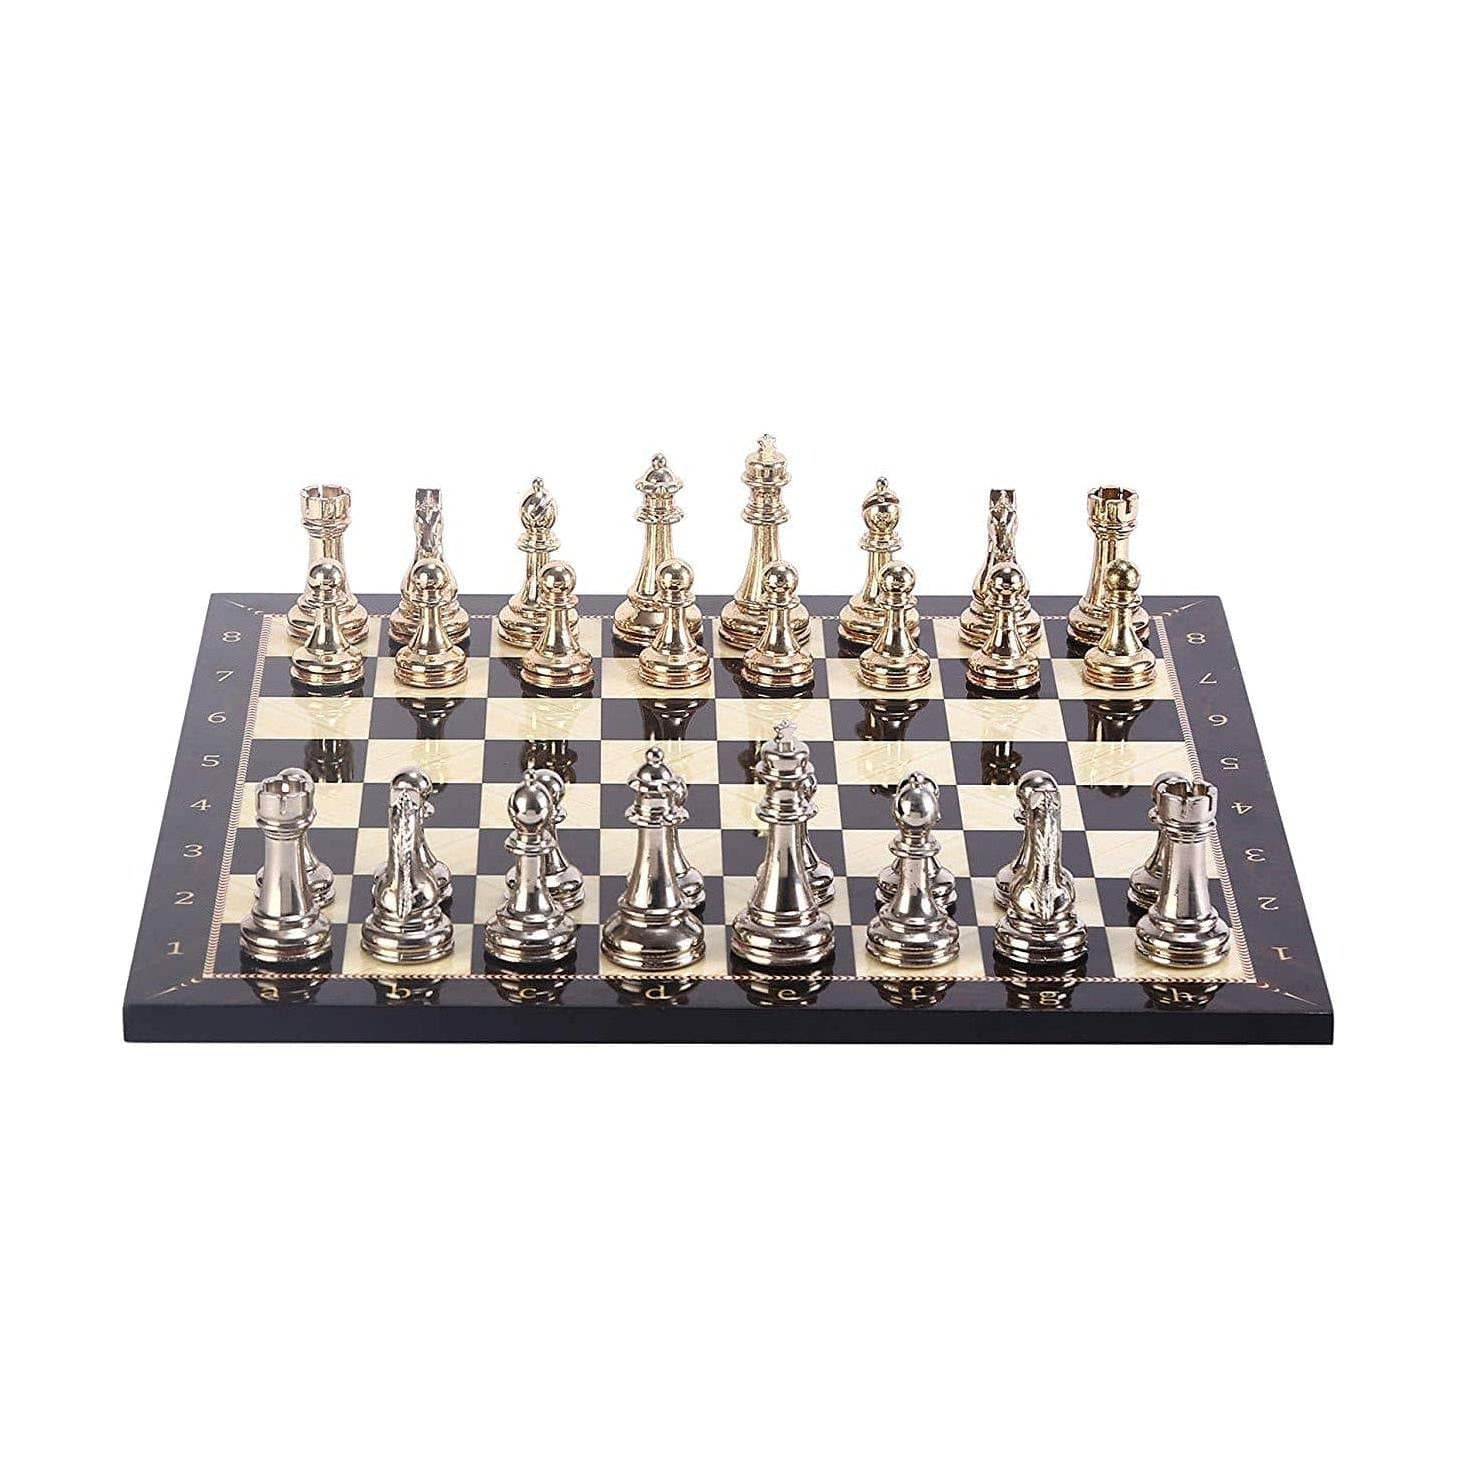 Handmade Pieces And Walnut Patterned Wood Chessboard | whatagift.com.au.